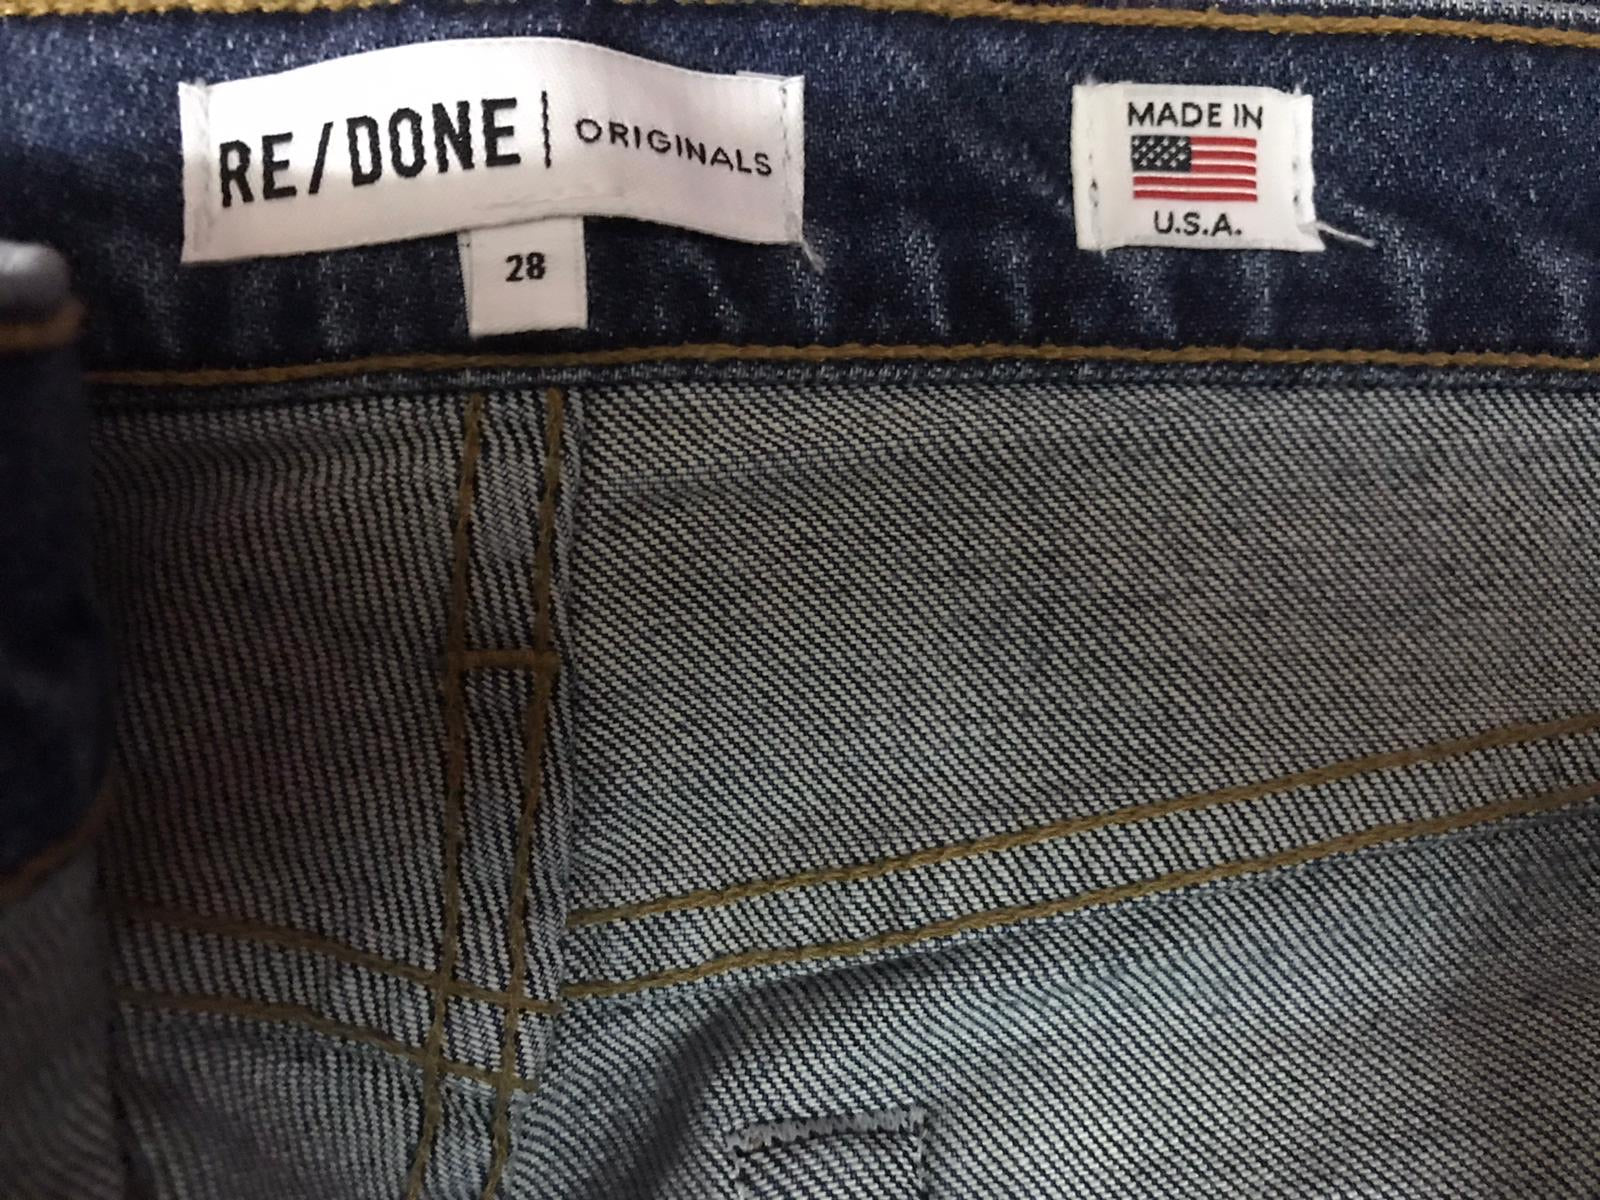 RE/ DONE Jeans